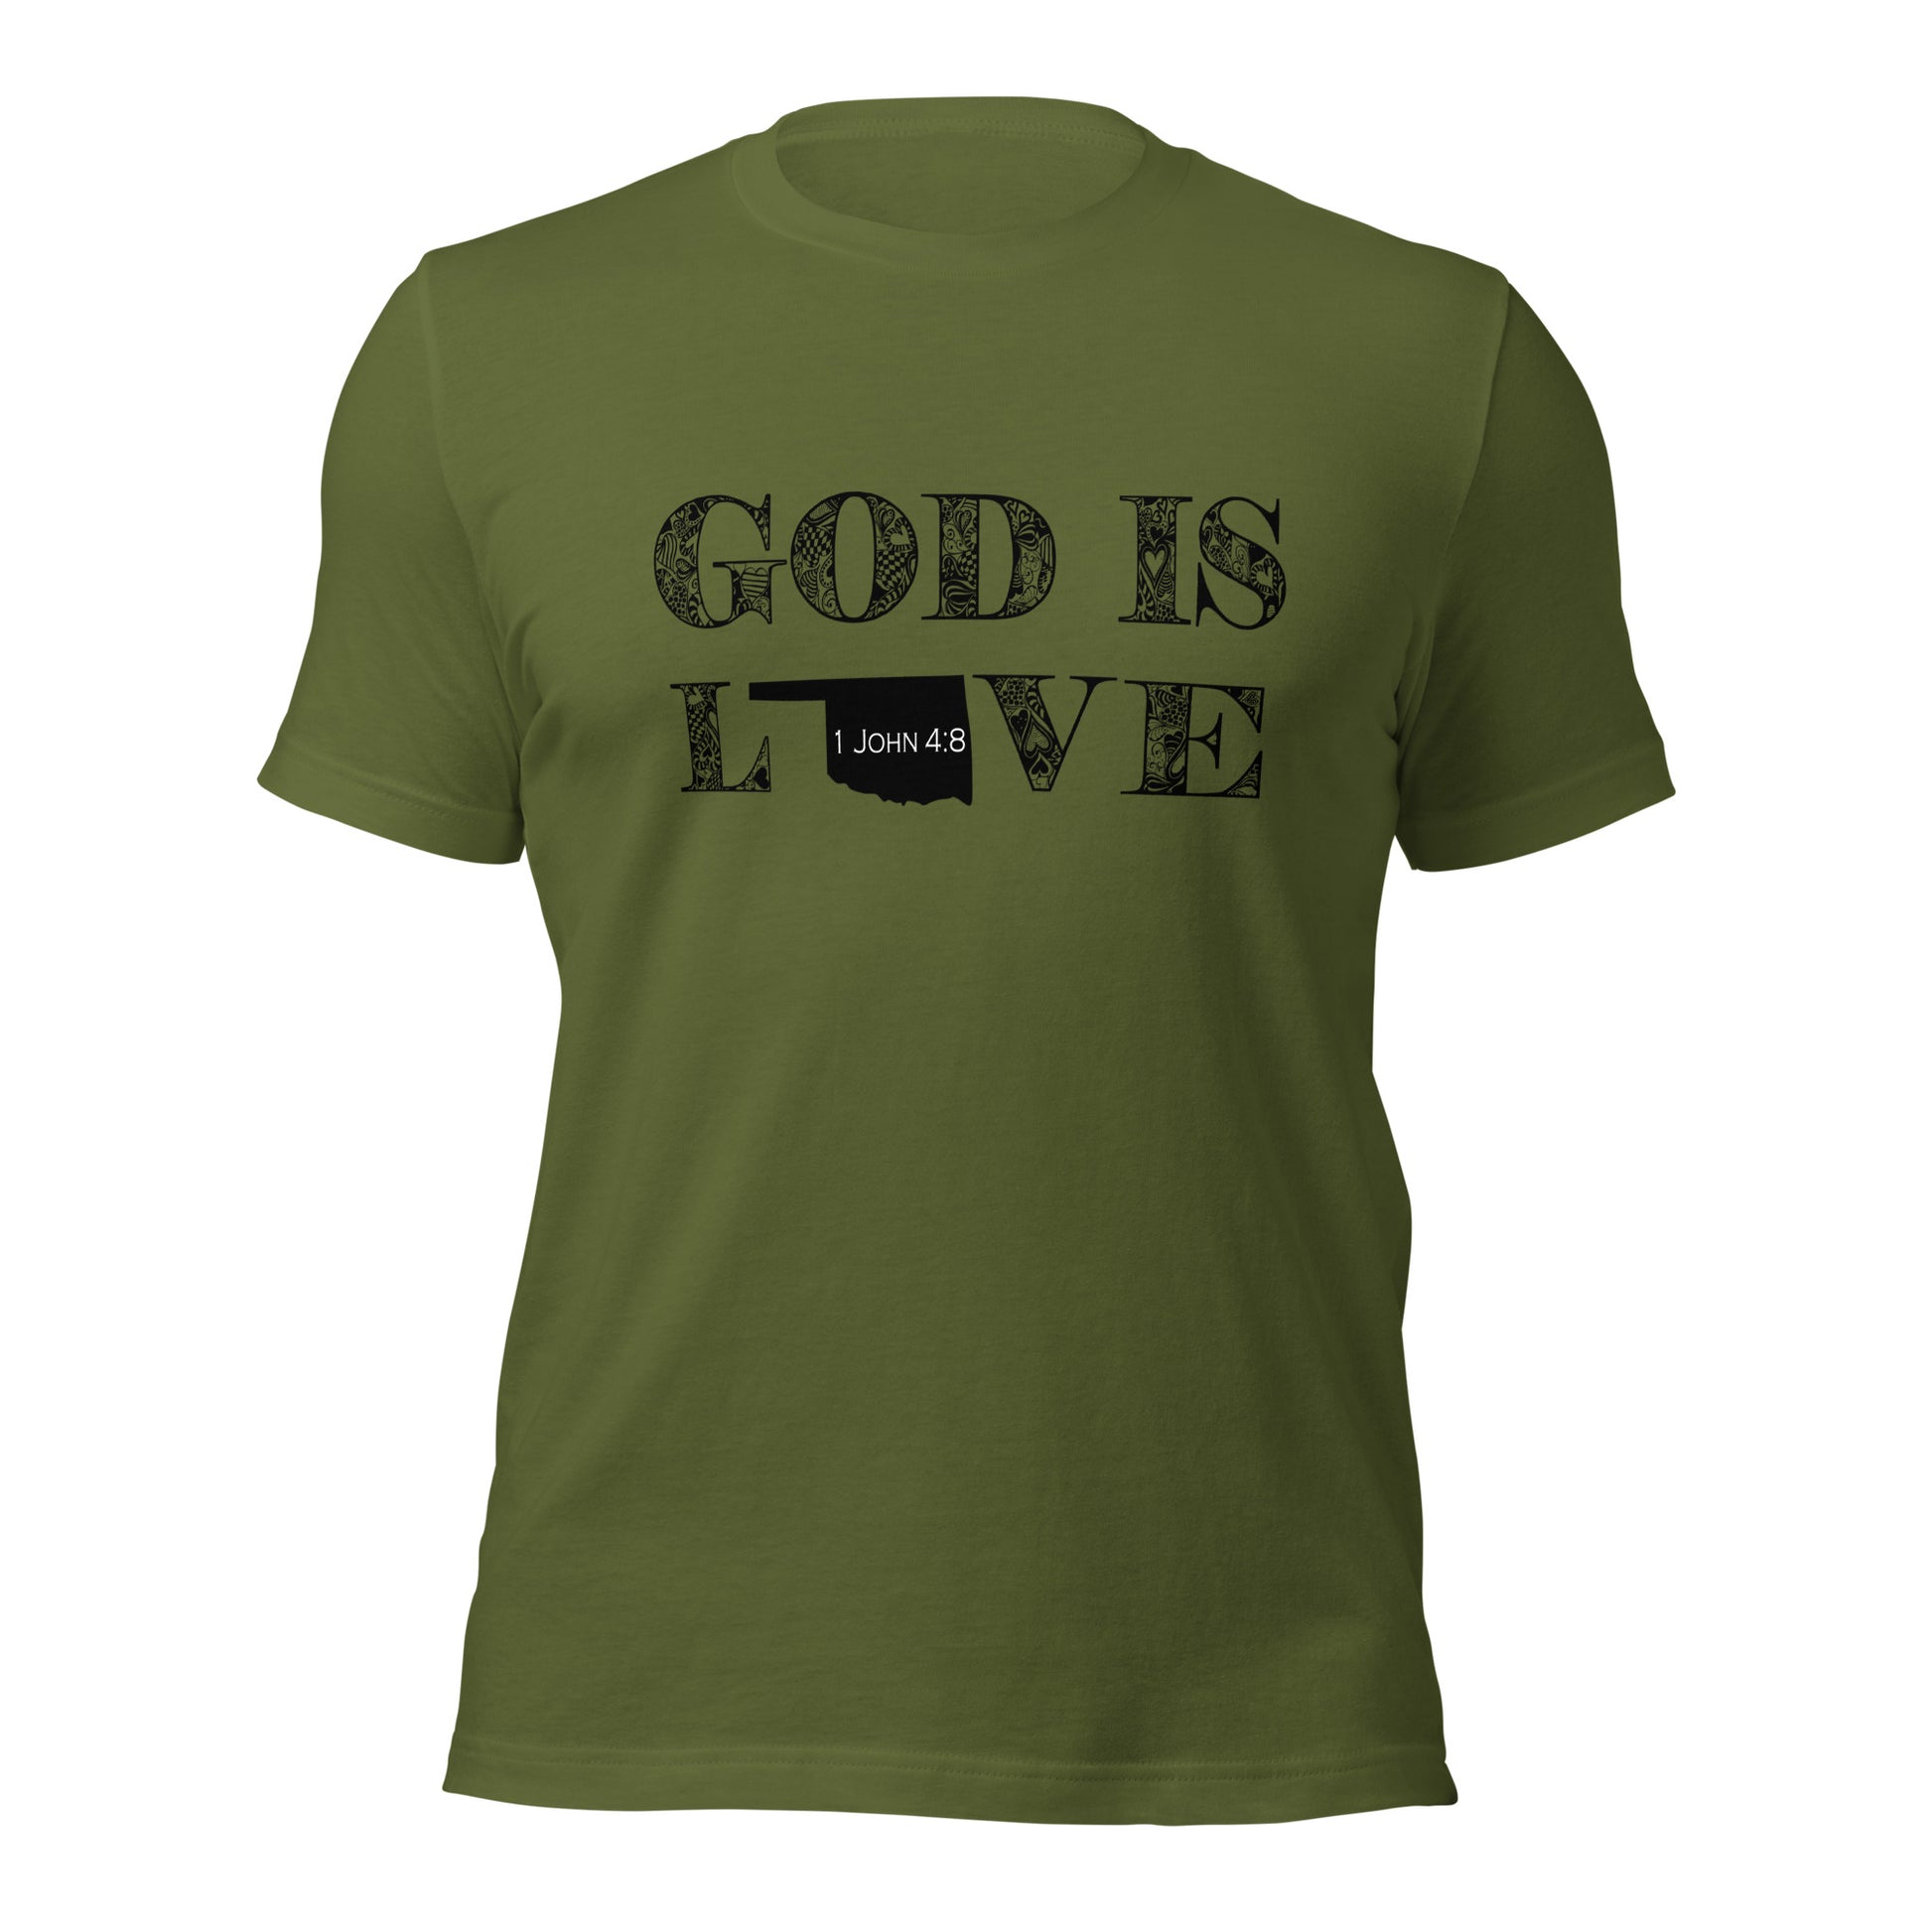 1 John 4:8 God is Love Unisex Oklahoma T-shirt in Olive - front view